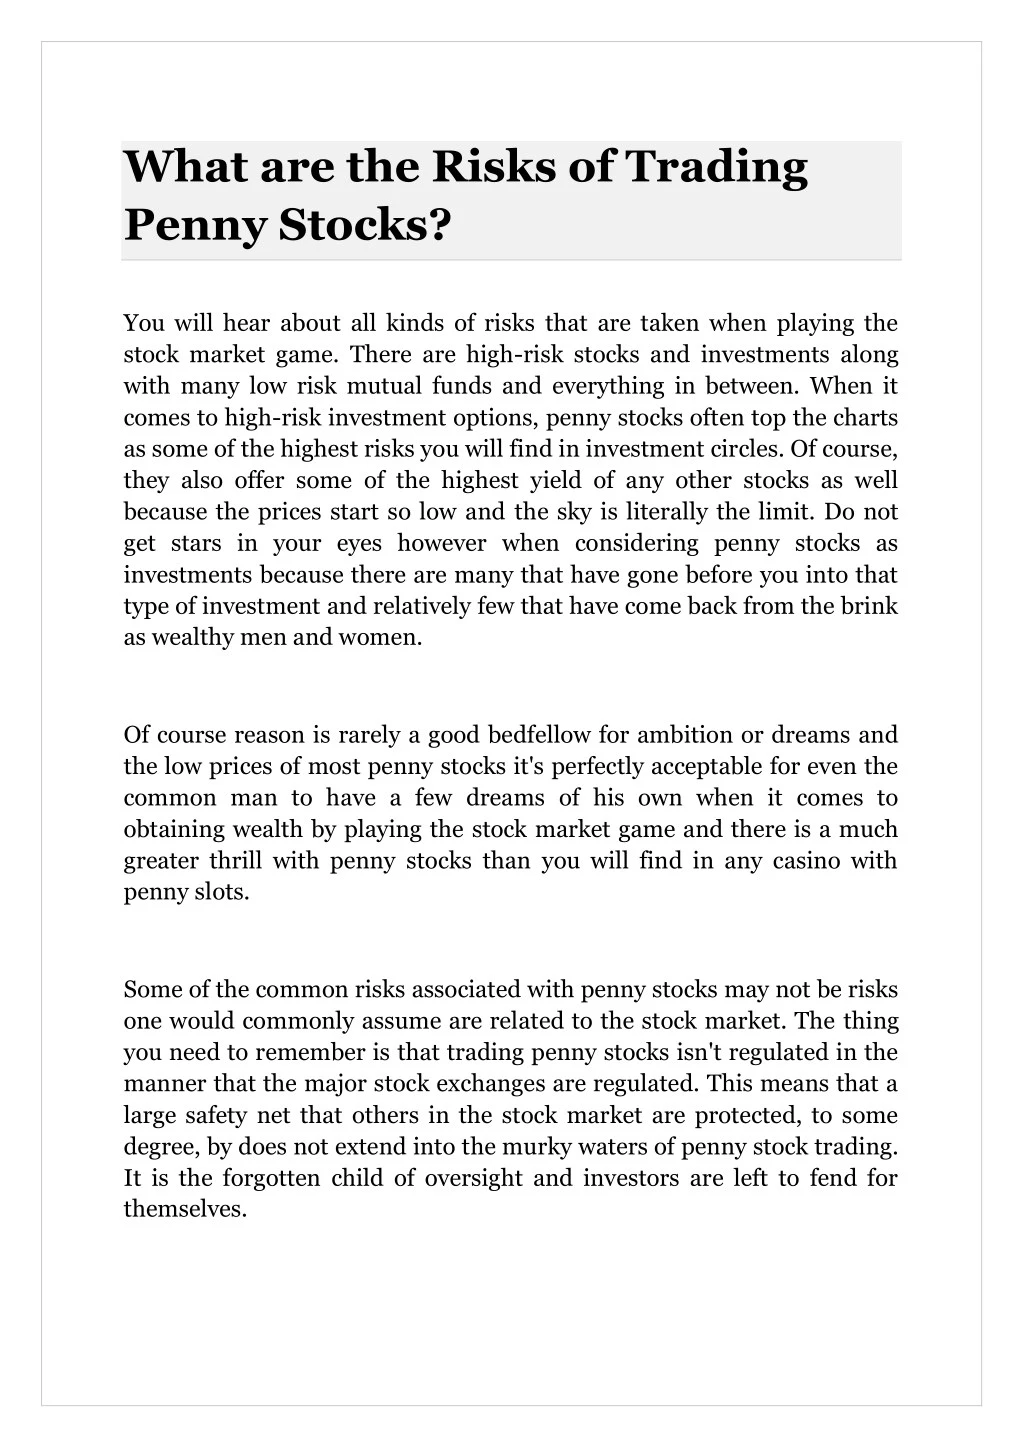 what are the risks of trading penny stocks